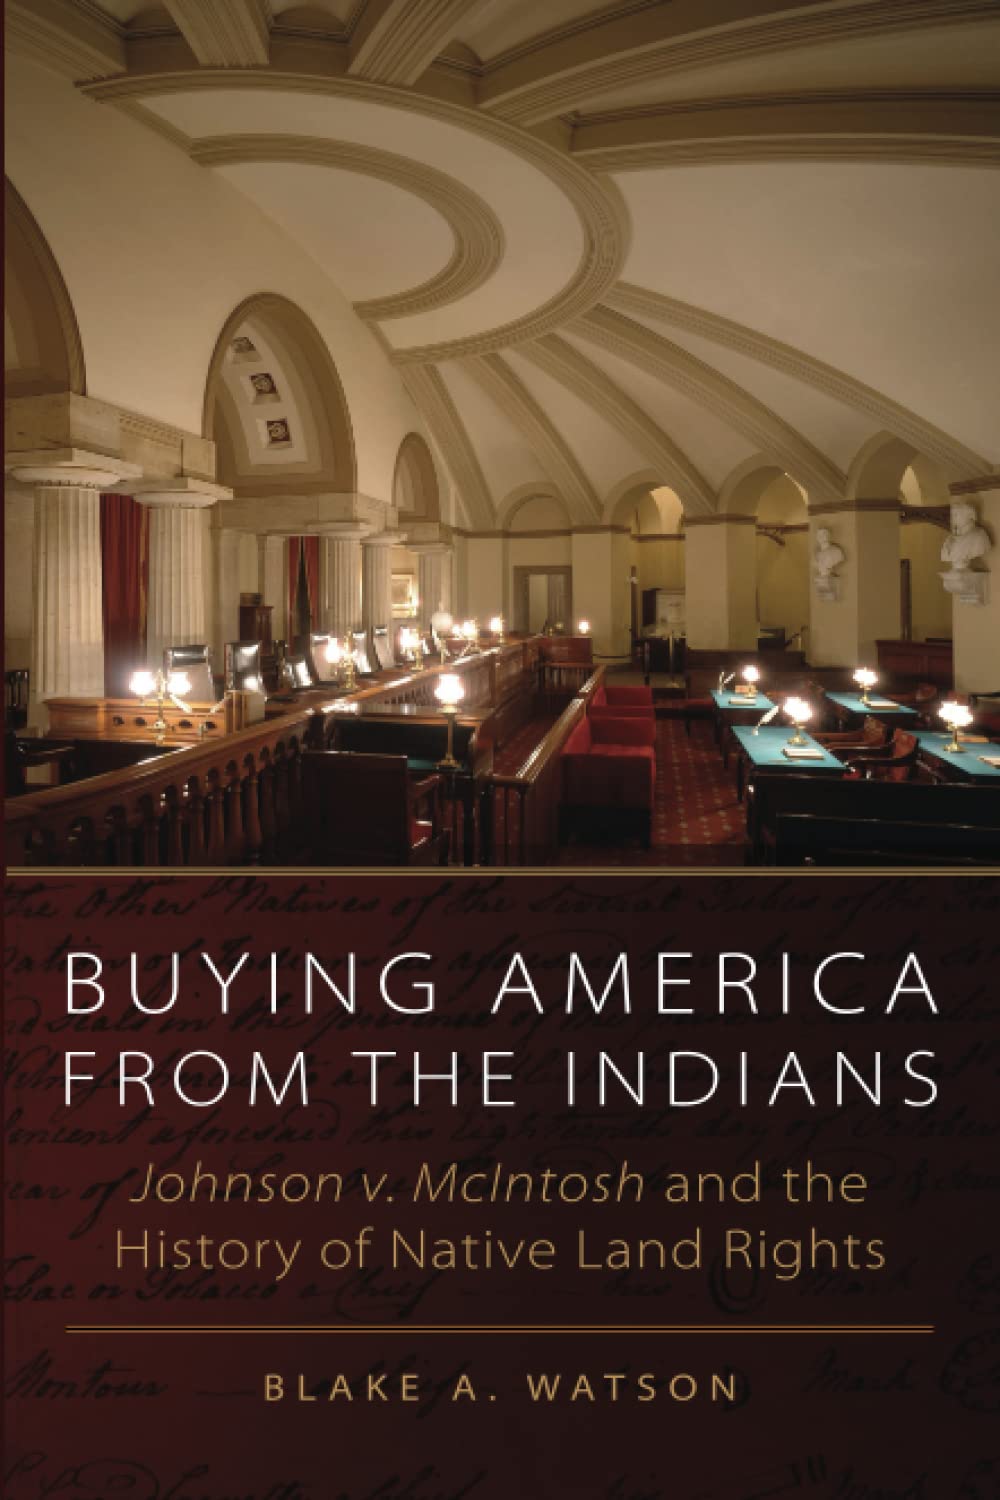 Buying America from the Indians: Johnson V. McIntosh and the History of Native Land Rights by Blake A. Watson